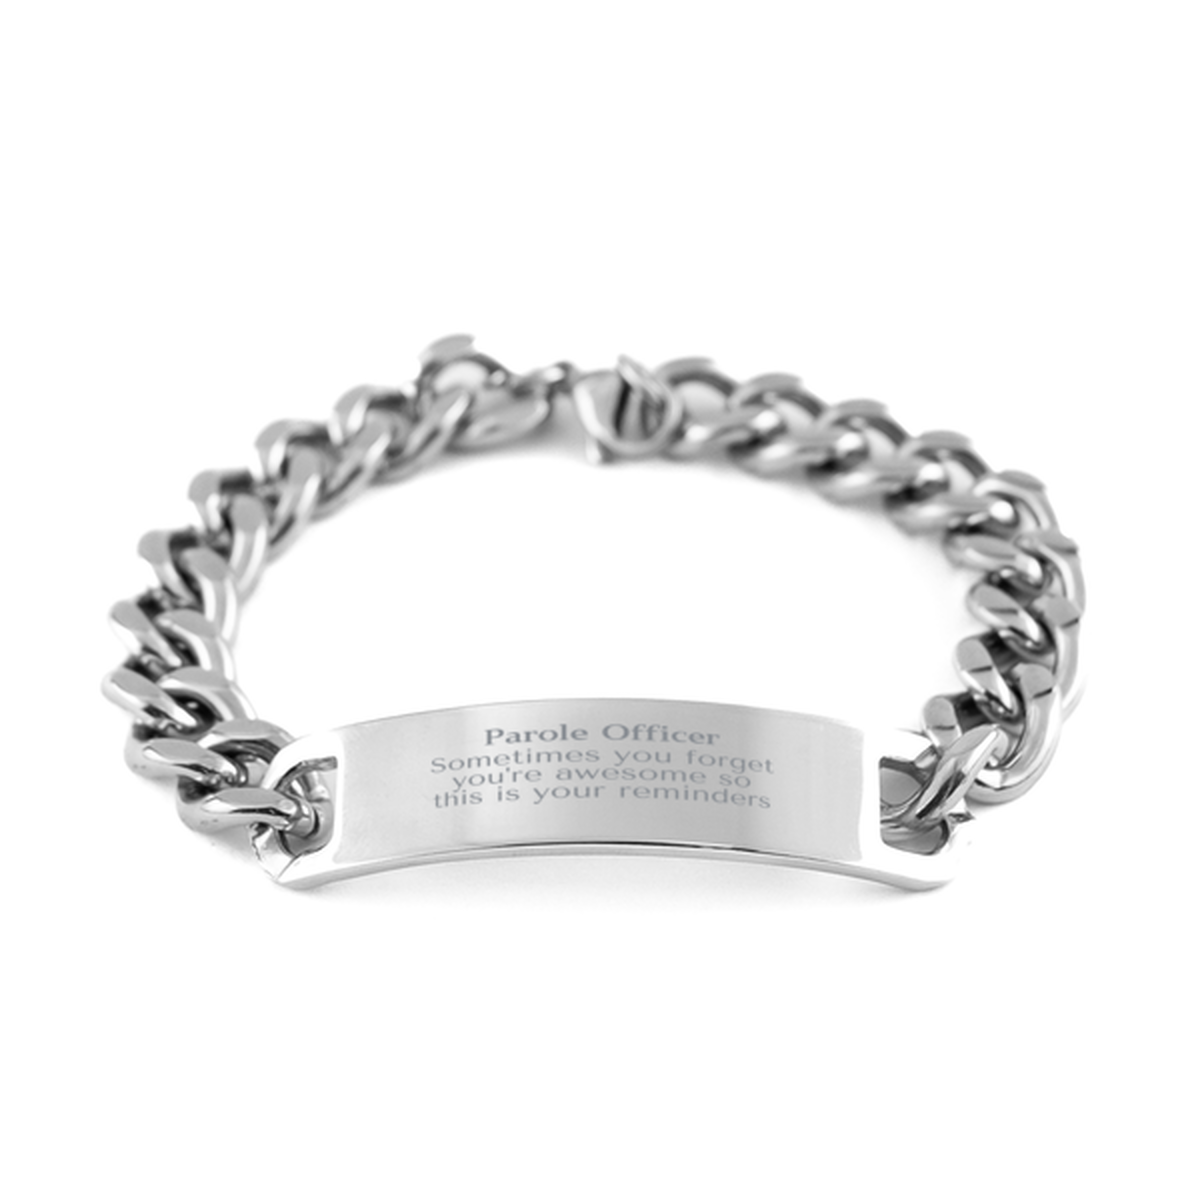 Sentimental Parole Officer Cuban Chain Stainless Steel Bracelet, Parole Officer Sometimes you forget you're awesome so this is your reminders, Graduation Christmas Birthday Gifts for Parole Officer, Men, Women, Coworkers